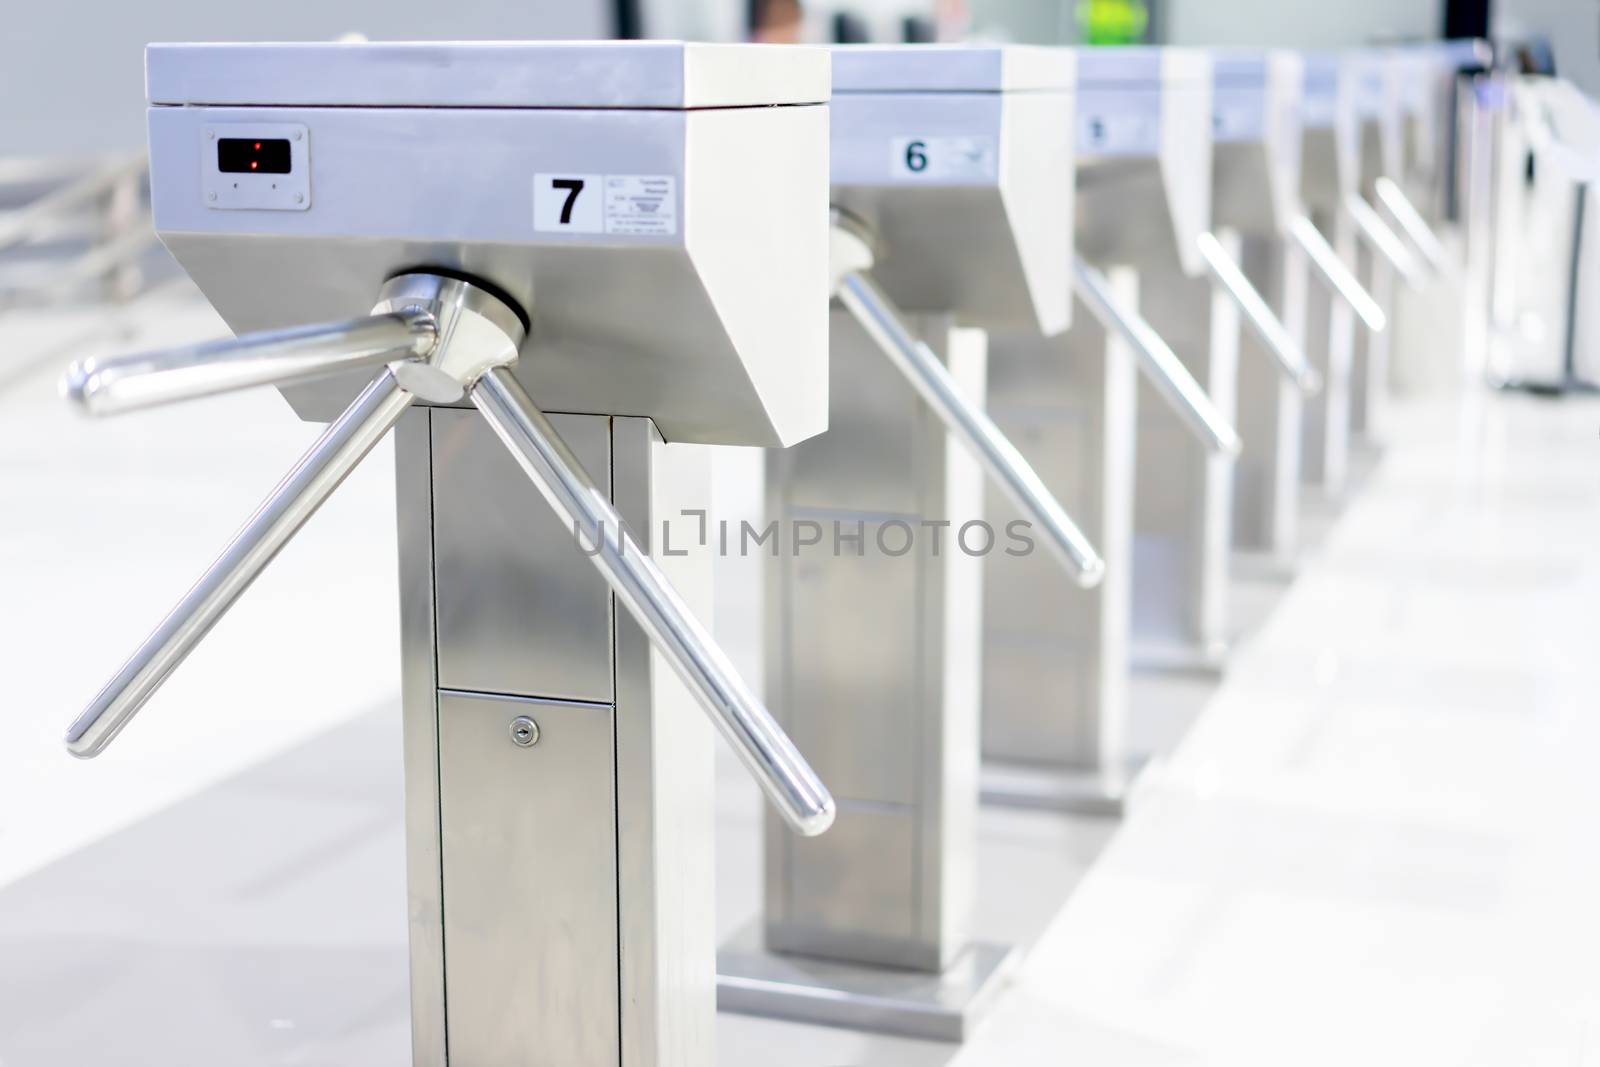 Turnstile gate for way exit or entrance by Buttus_casso